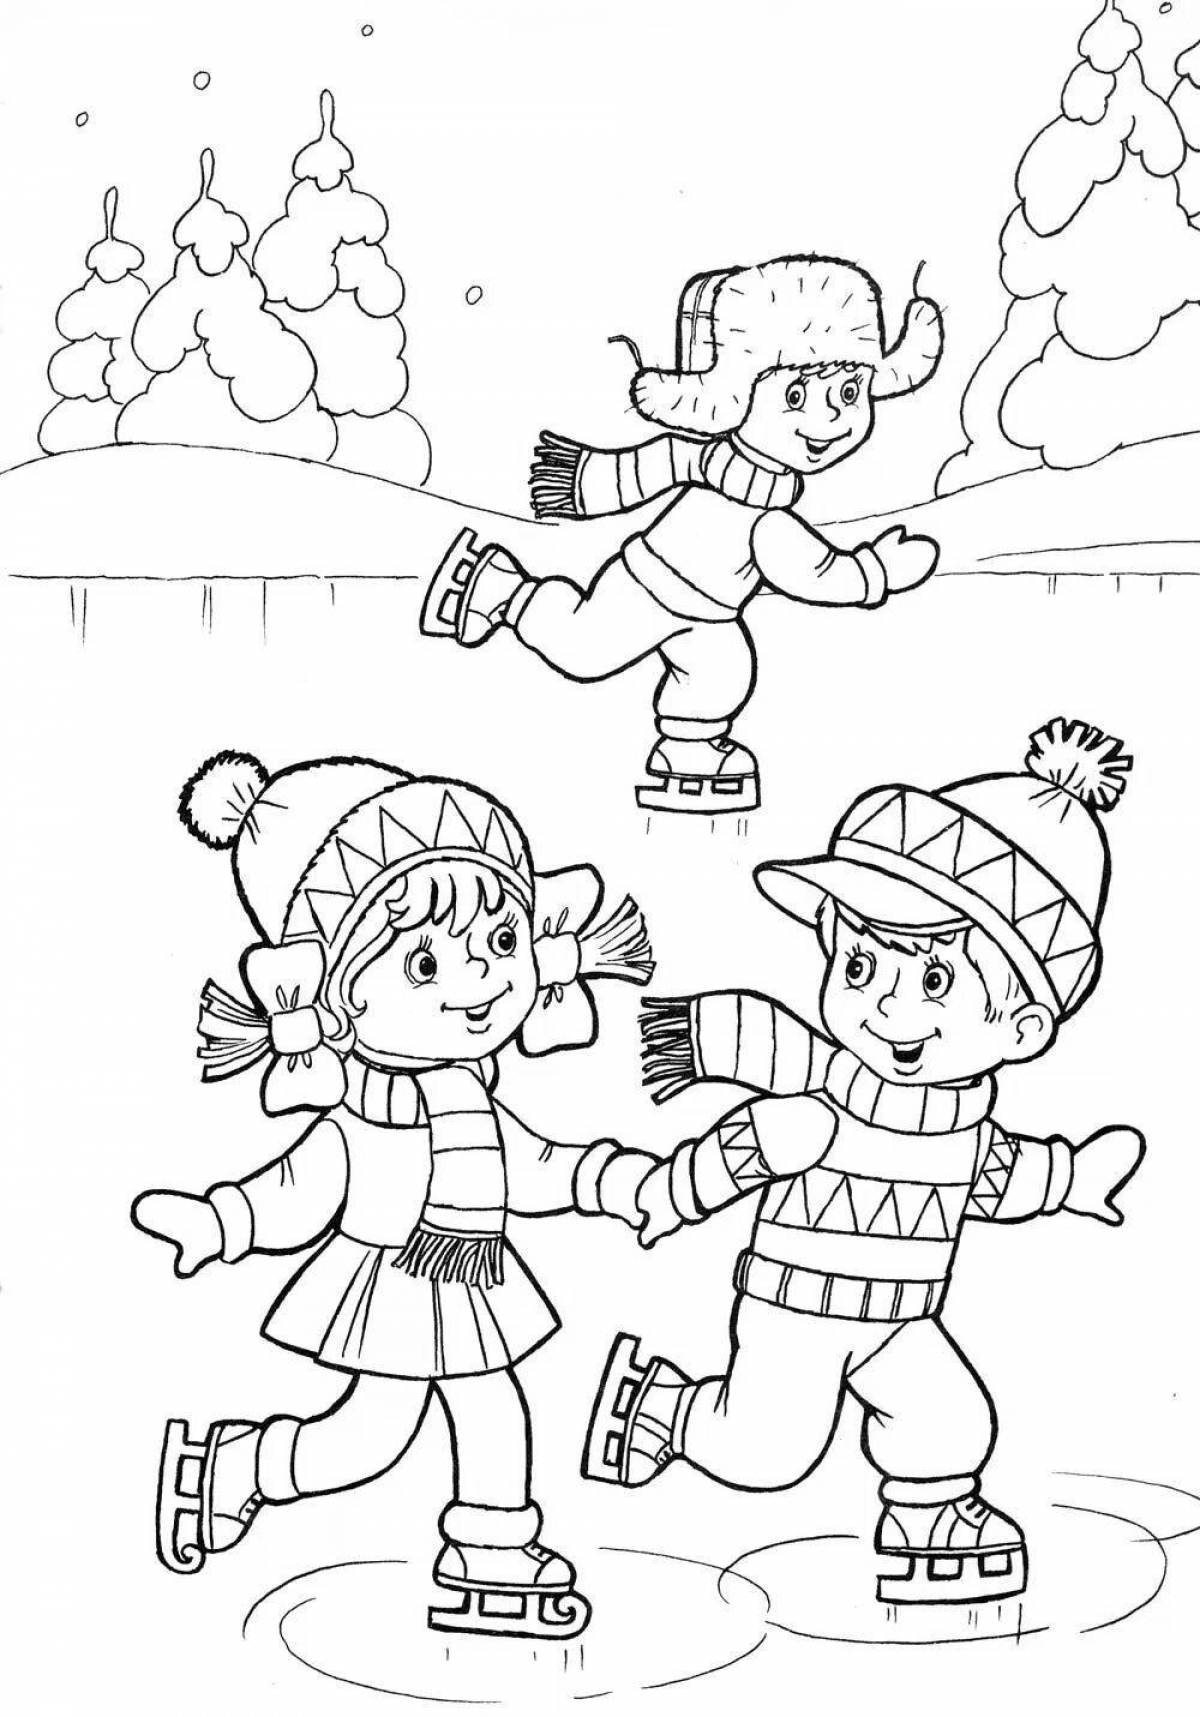 Joyful winter coloring book for children 4-5 years old